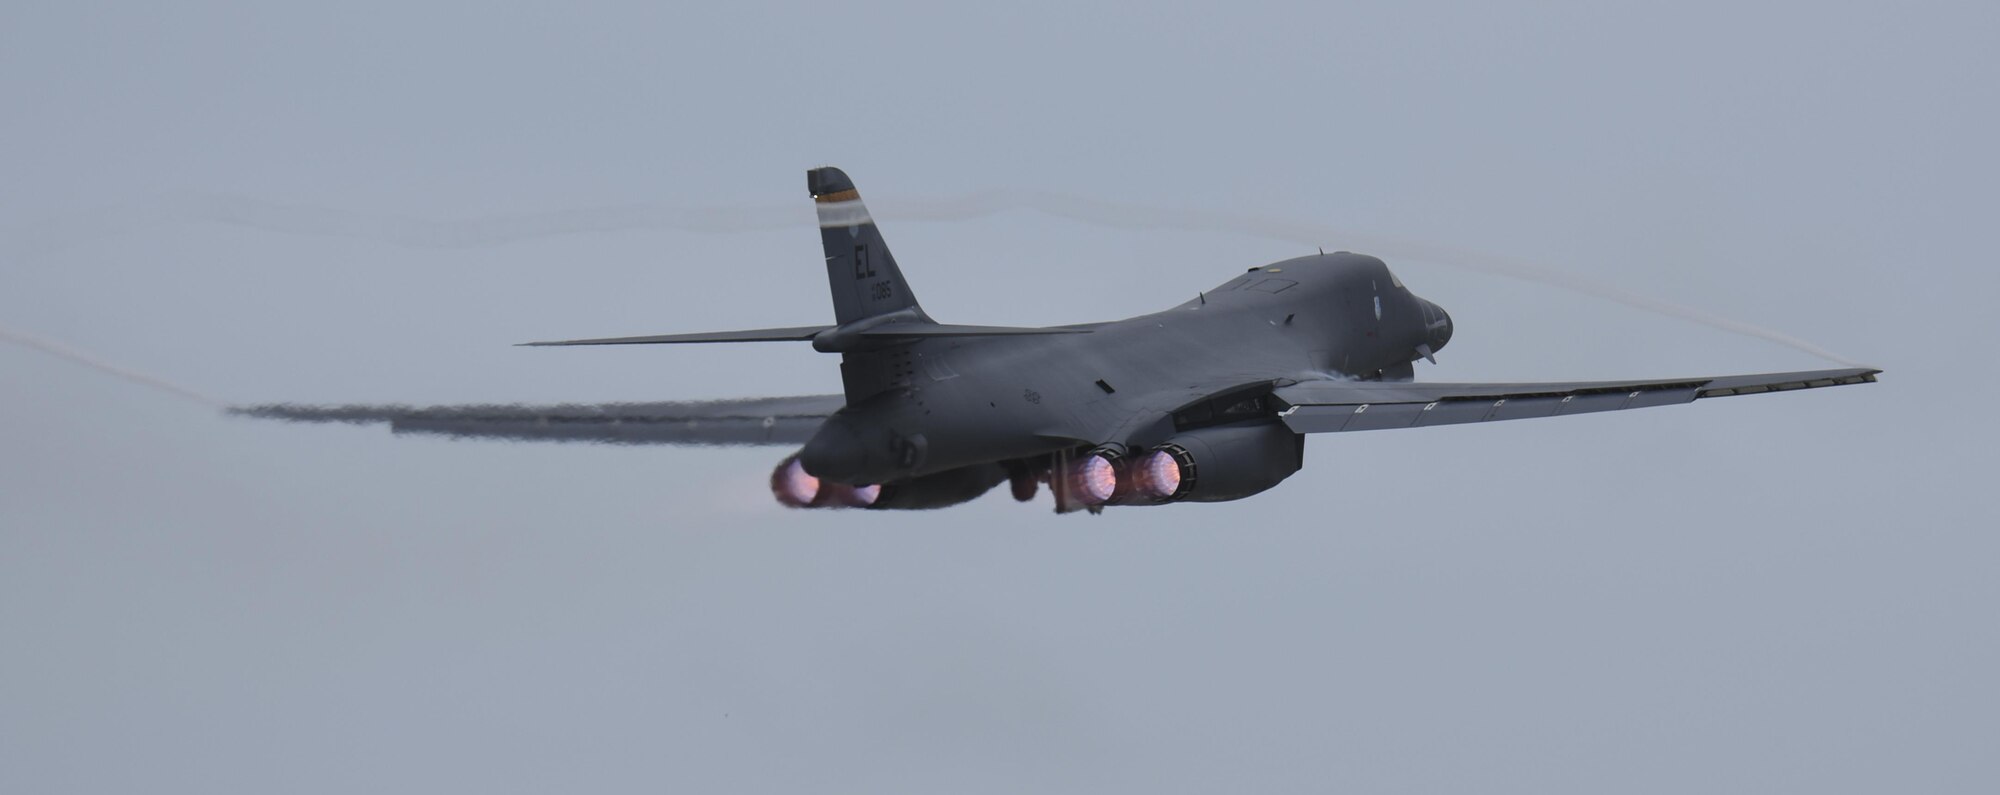 A U.S. Air Force B-1 Lancer takes off at Andersen Air Force Base, Guam, for an integrated bomber operation Aug.17, 2016. This mission marks the first time in history that all three of Air Force Global Strike Command's strategic bomber aircraft are simultaneously conducting integrated operations in the U.S. Pacific Command area of operations. As of Aug. 15, the B-1 Lancer will be temporarily deployed to Guam in support of U.S. Pacific Command's Continuous Bomber Presence mission. (U.S. Air Force photo by Tech Sgt Richard P. Ebensberger/Released)